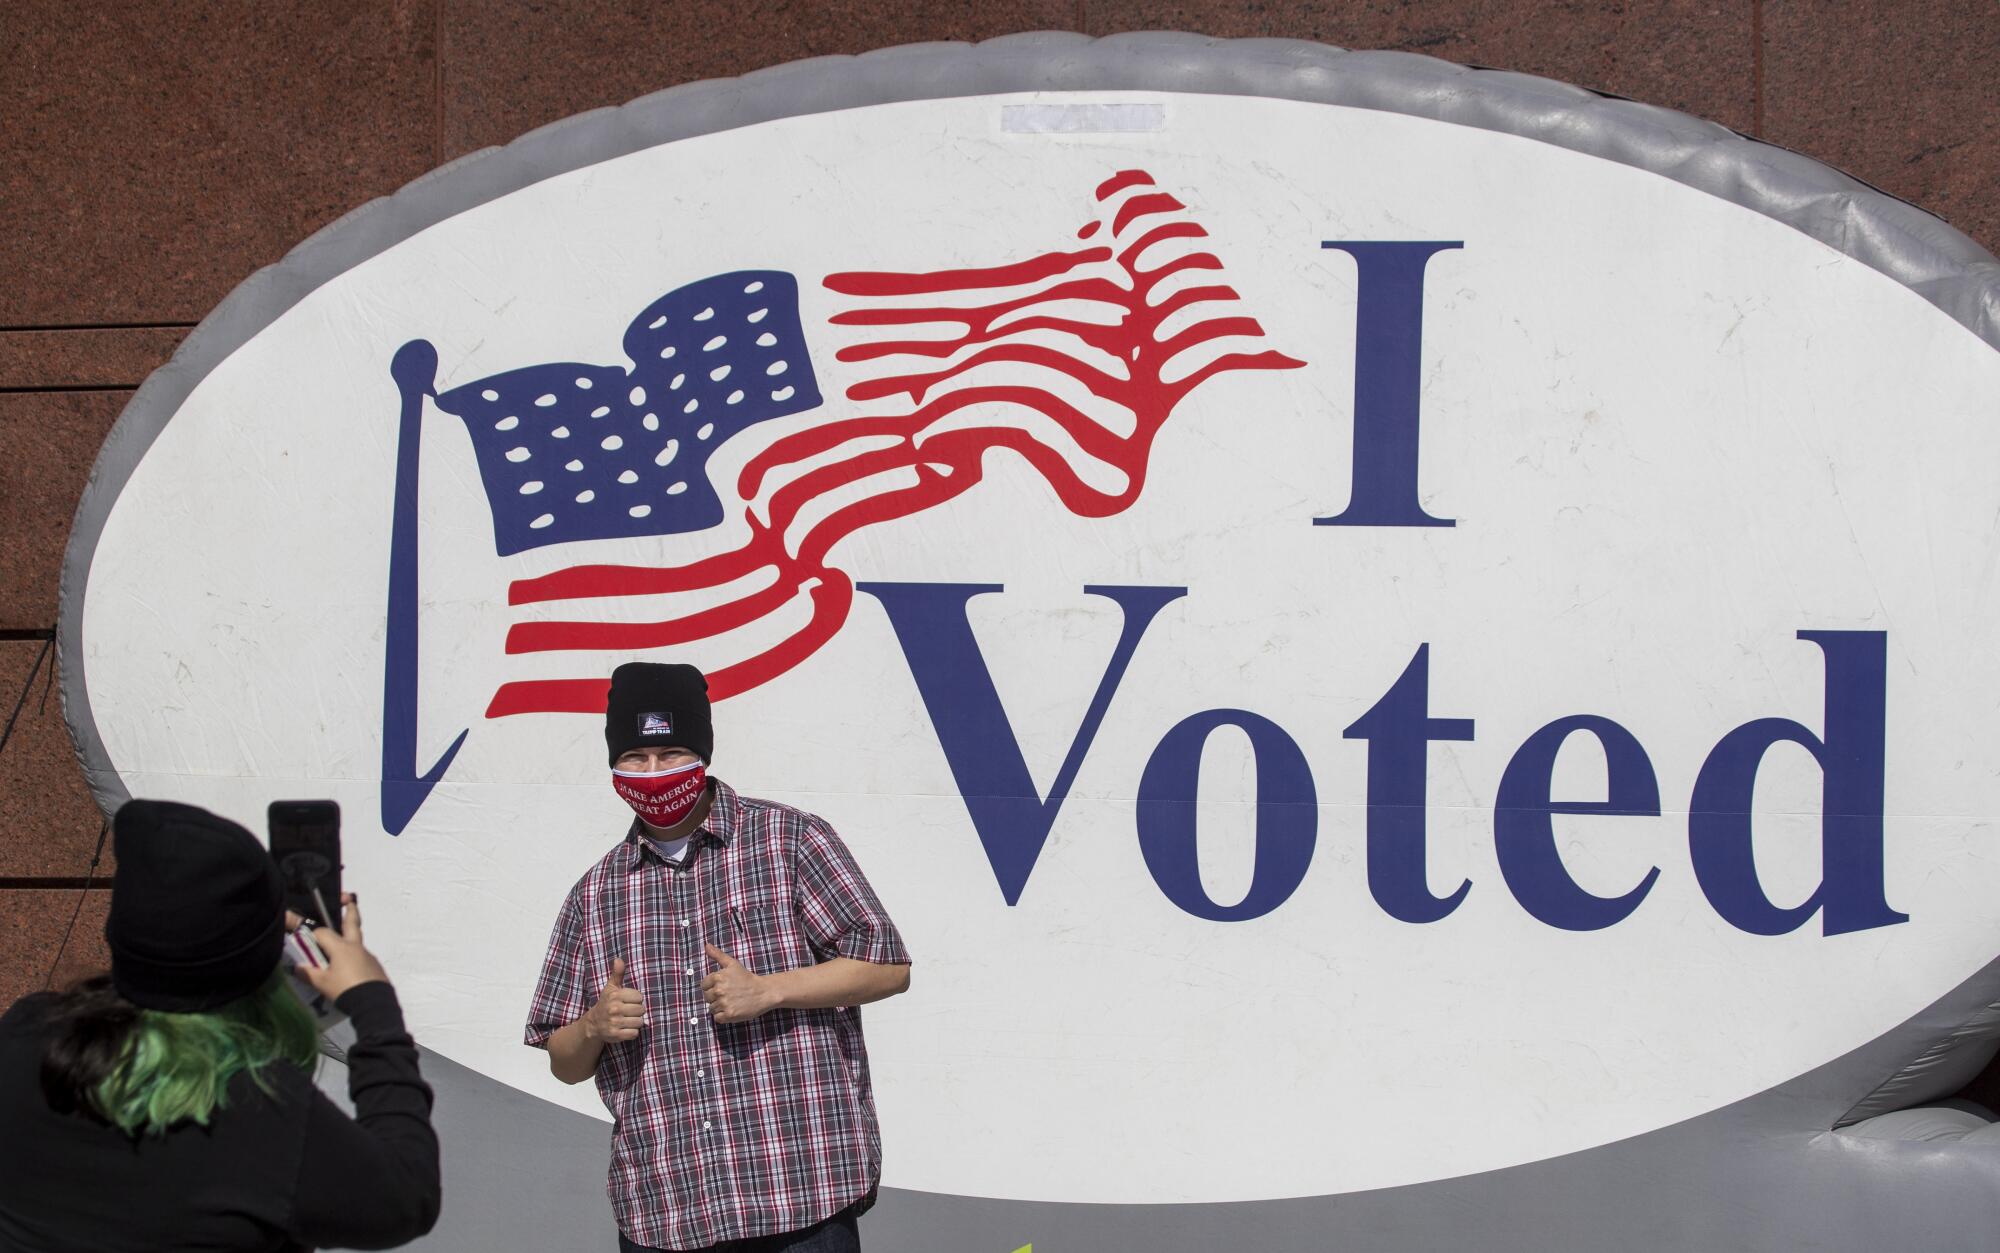 A man poses for a photo in front of a giant I Voted image.